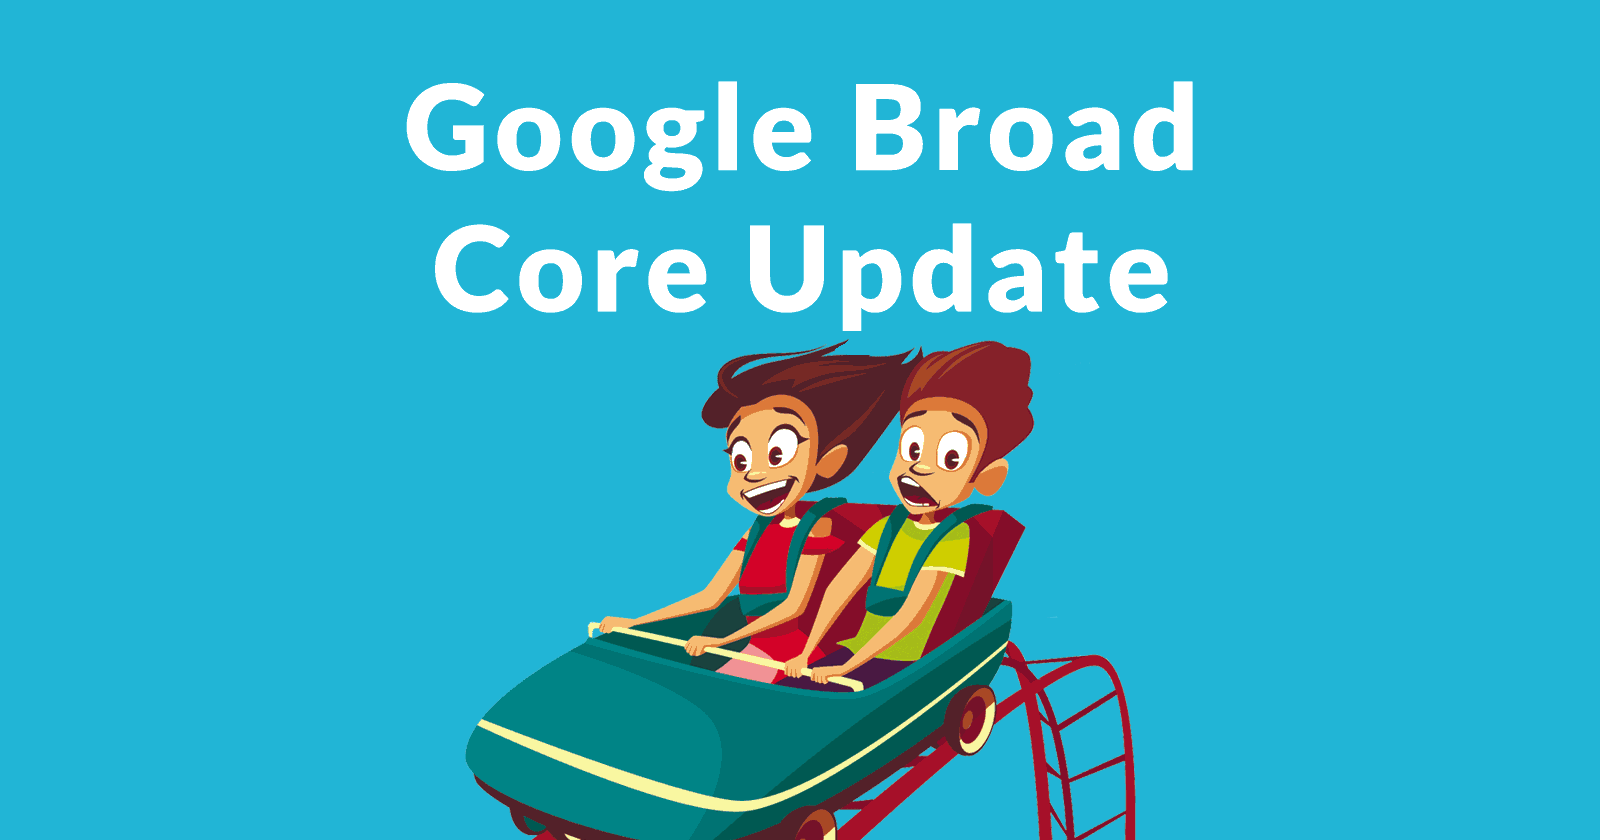 Image of two people on a roller coaster and the words, Google Broad Core Update